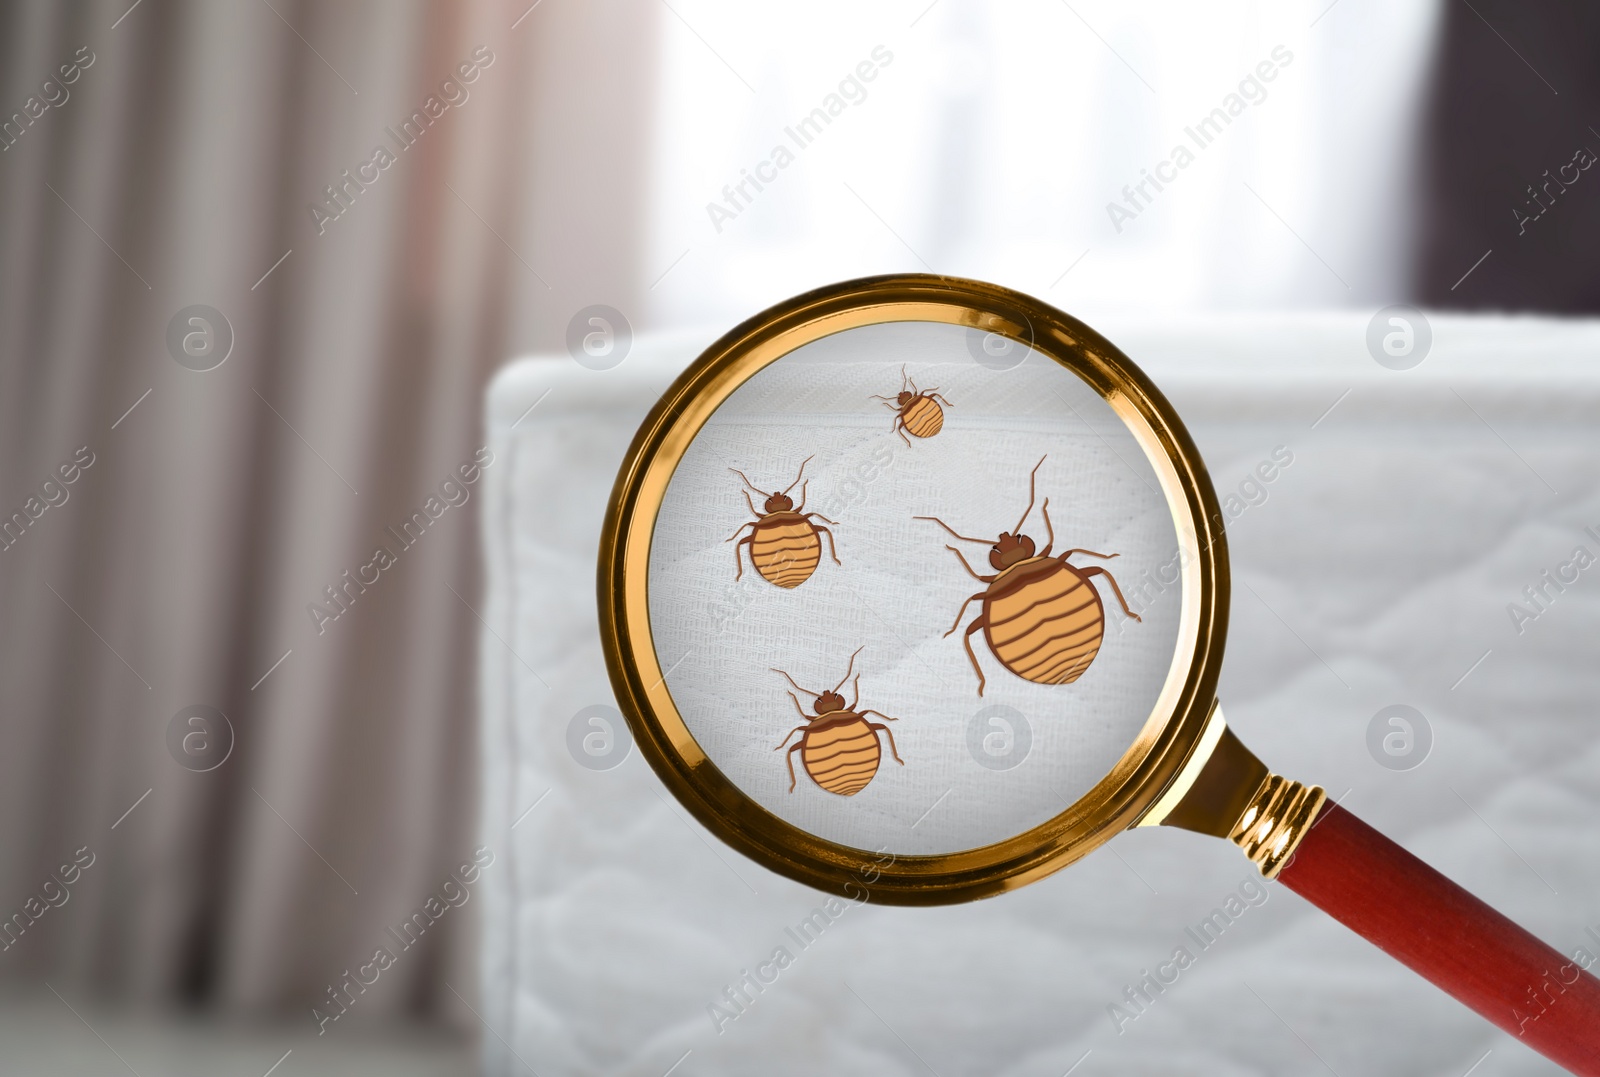 Image of Magnifying glass detecting bed bug on mattress, closeup view